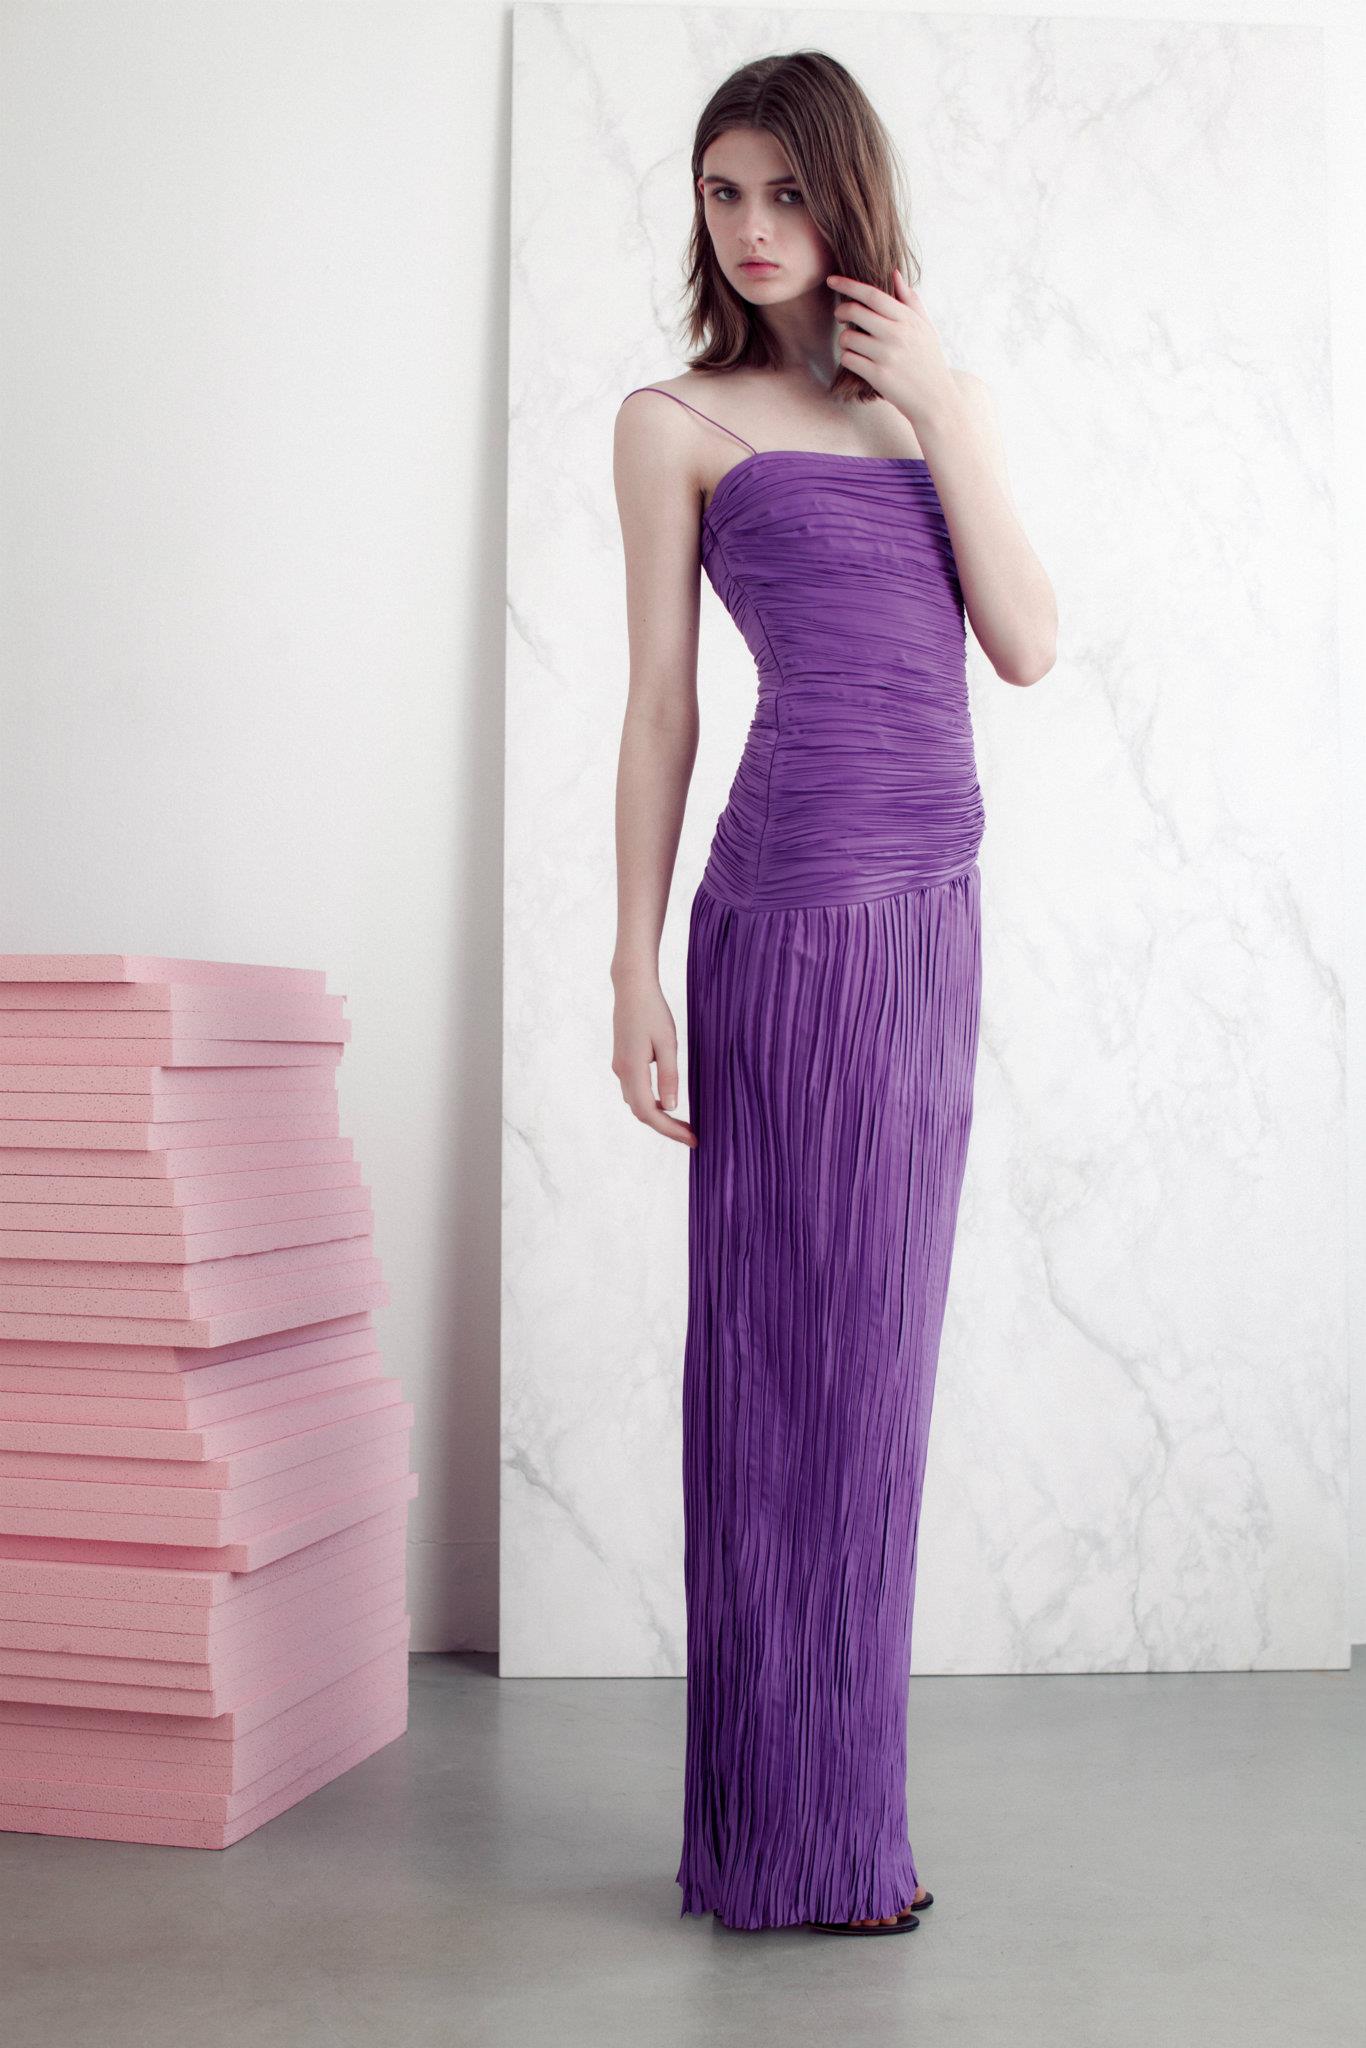 Vionnet Spring 2013 Collection 1